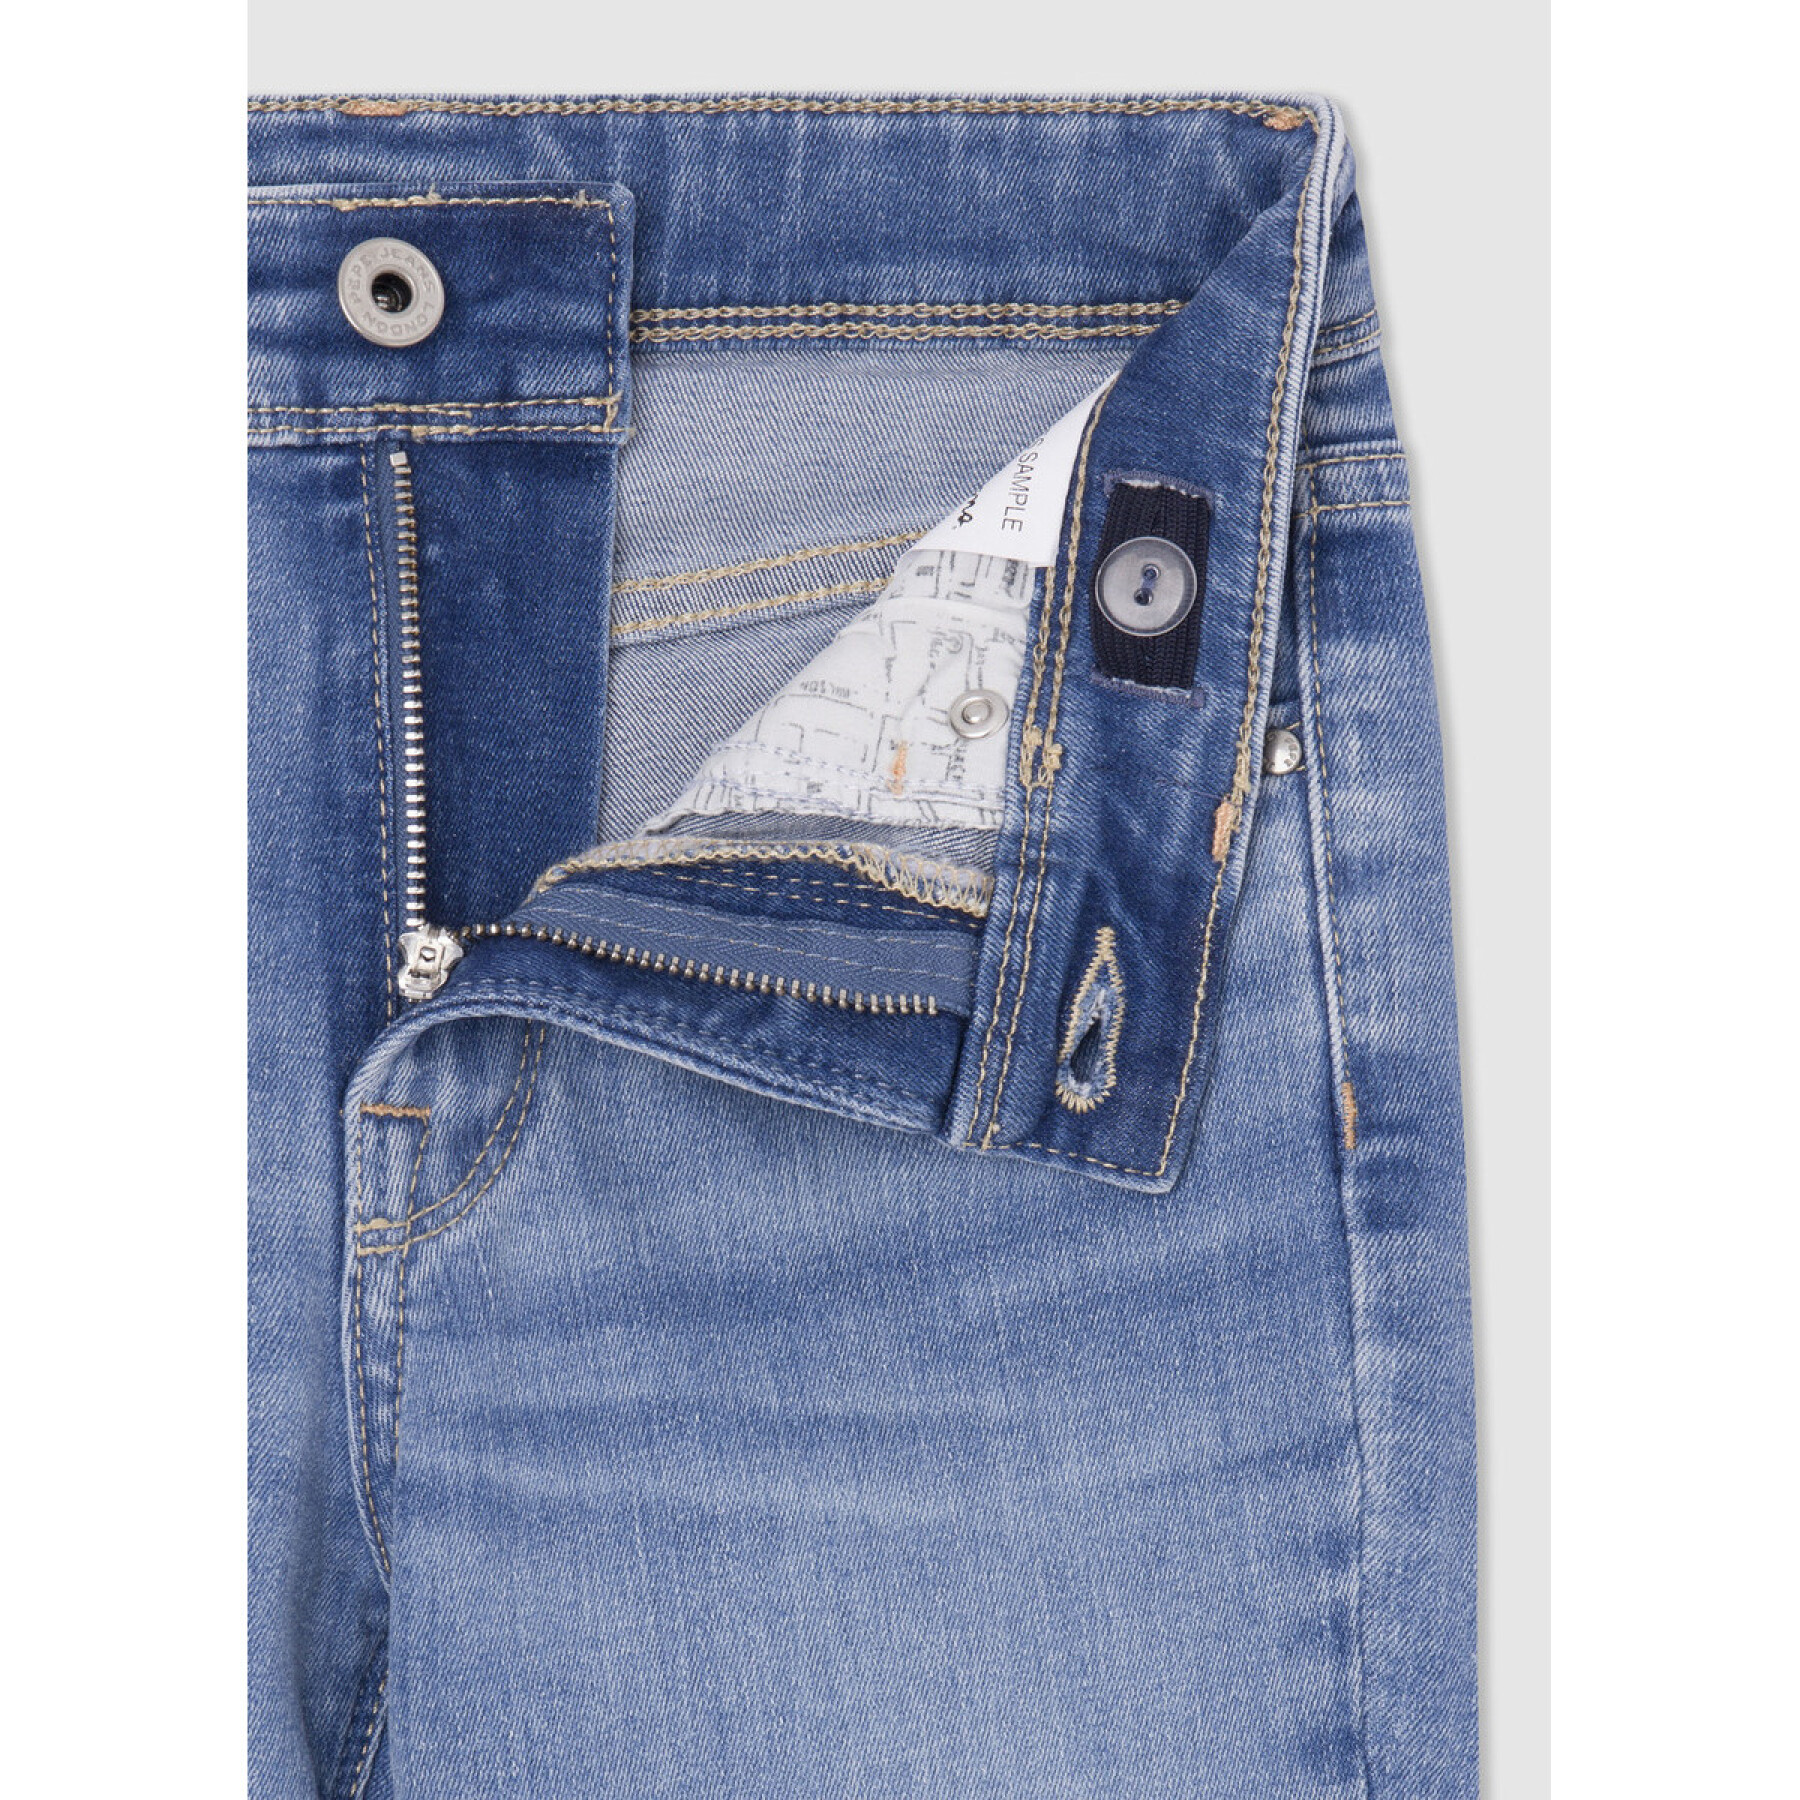 Jeans skinny fille Pepe Jeans